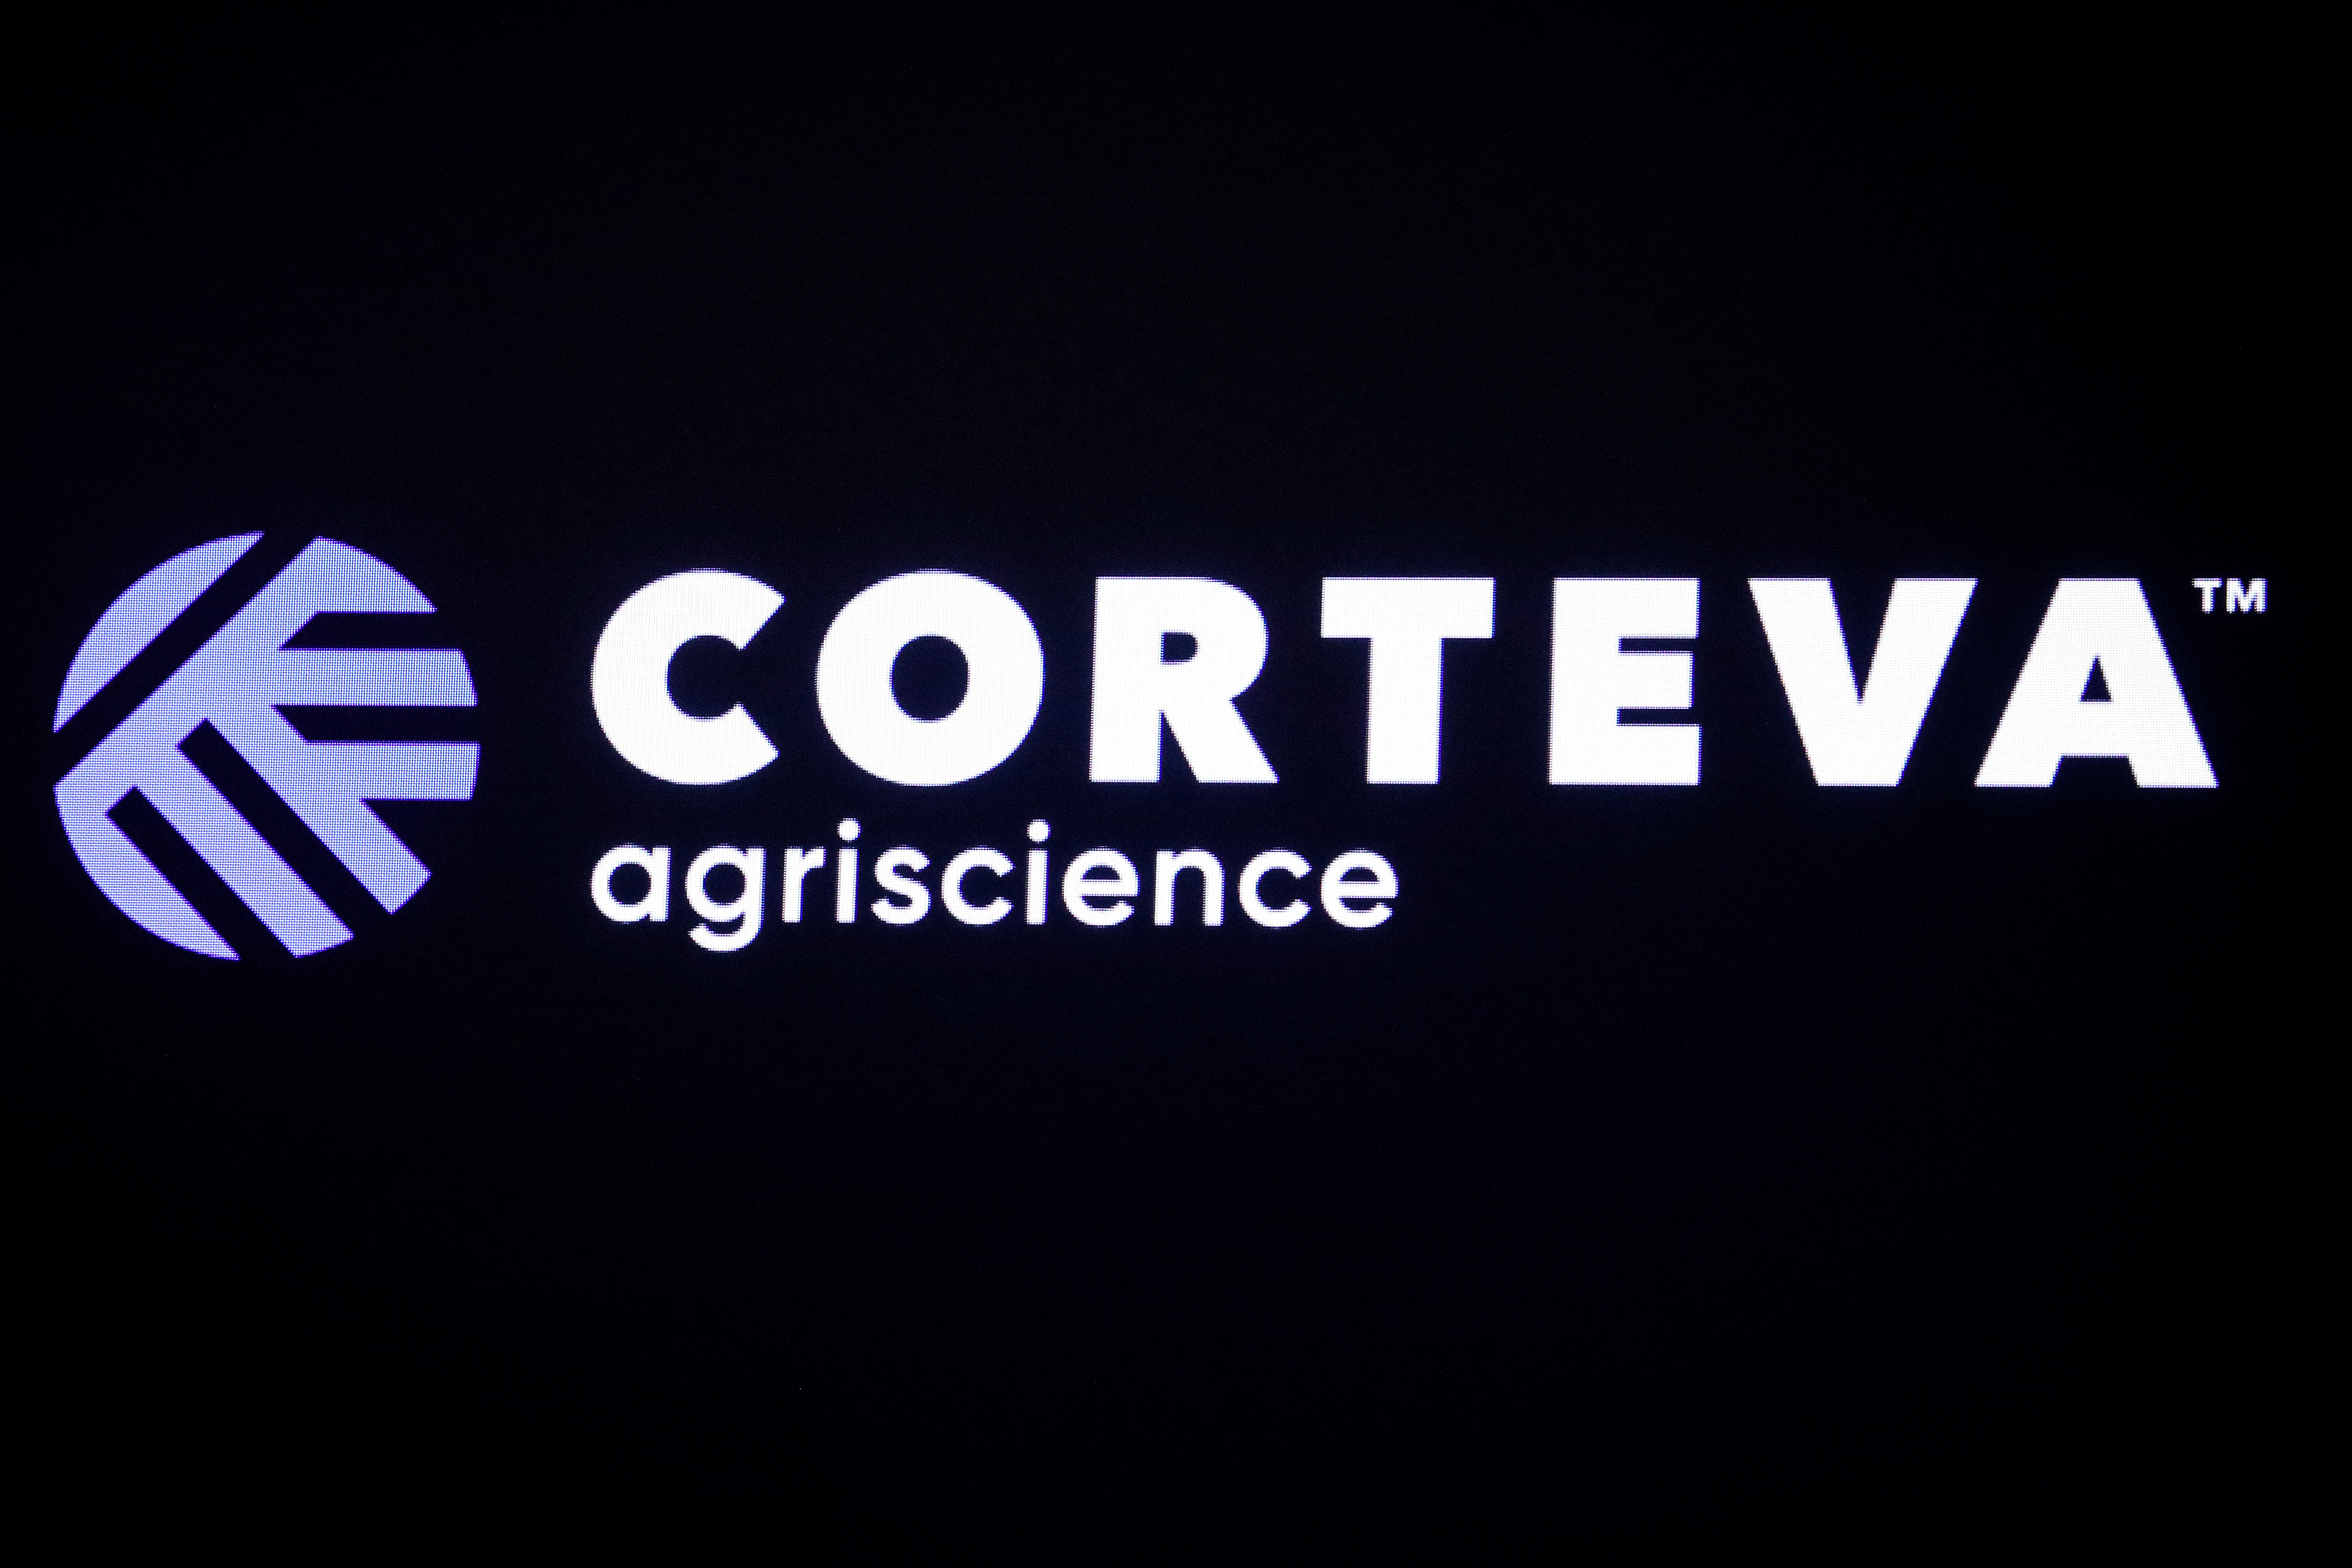 The logo for Corteva Agriscience, a former division of DowDuPont, is displayed on a screen at the NYSE in New York